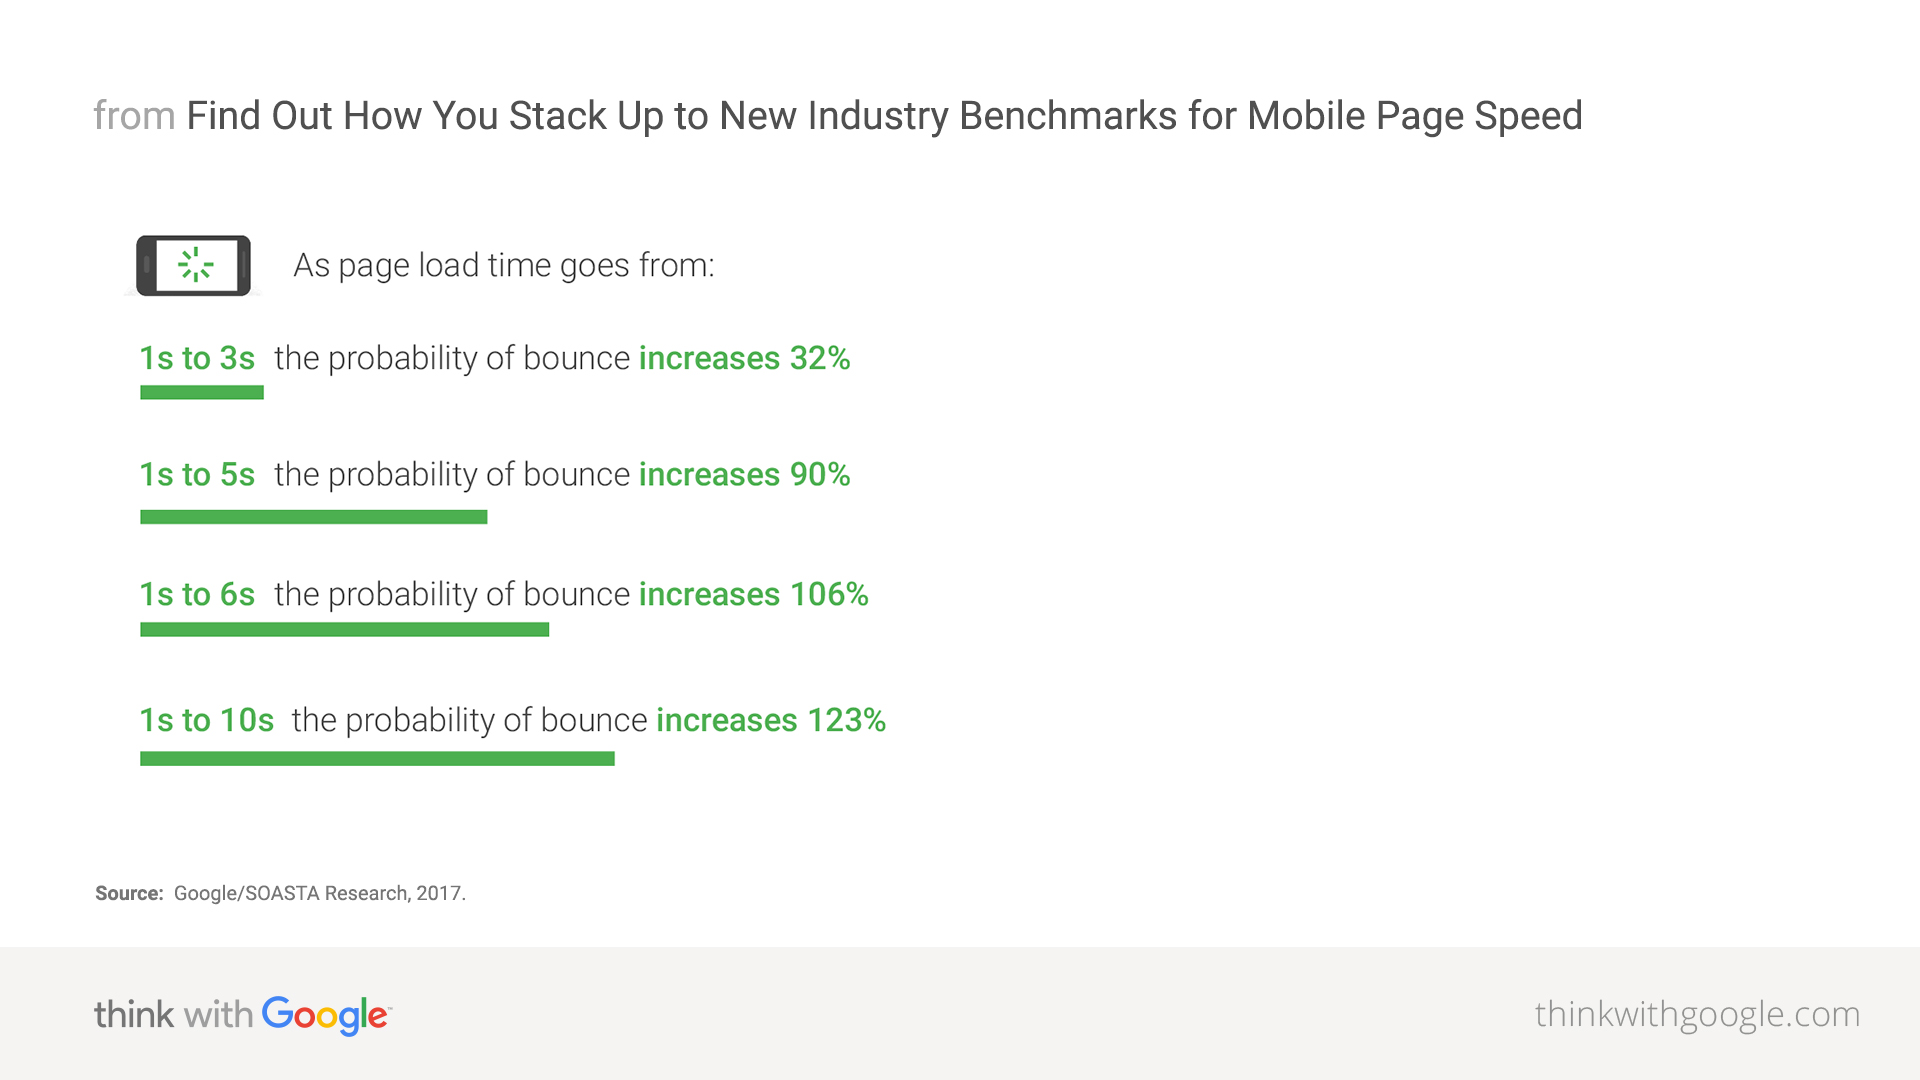 Mobile page speed industry benchmarks